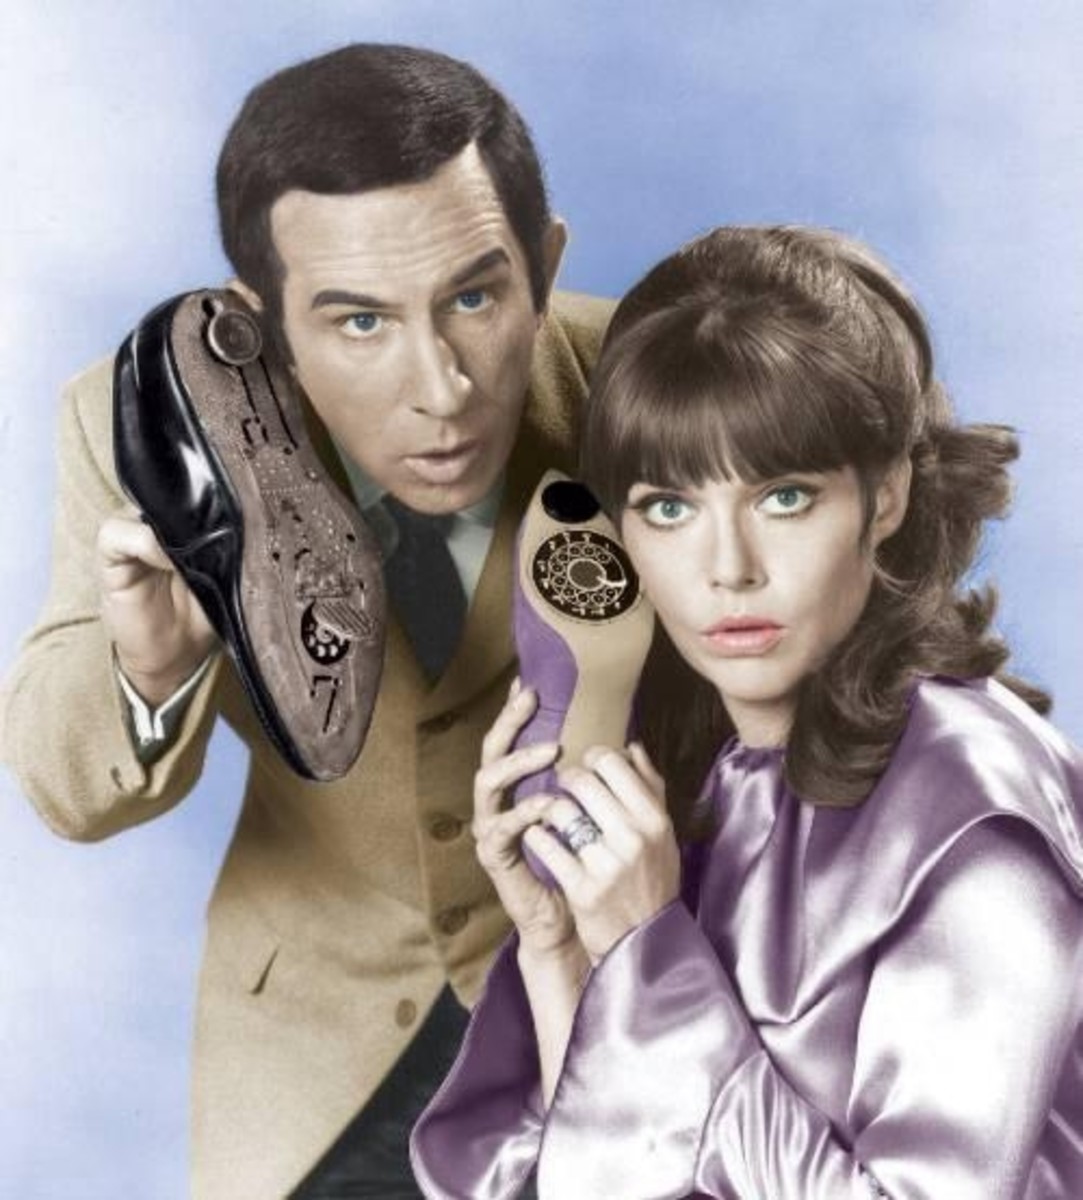 Agents 86 and 99 with show phones in Get Smart, 1960s - 1970s. Property of CBS and NBC. 